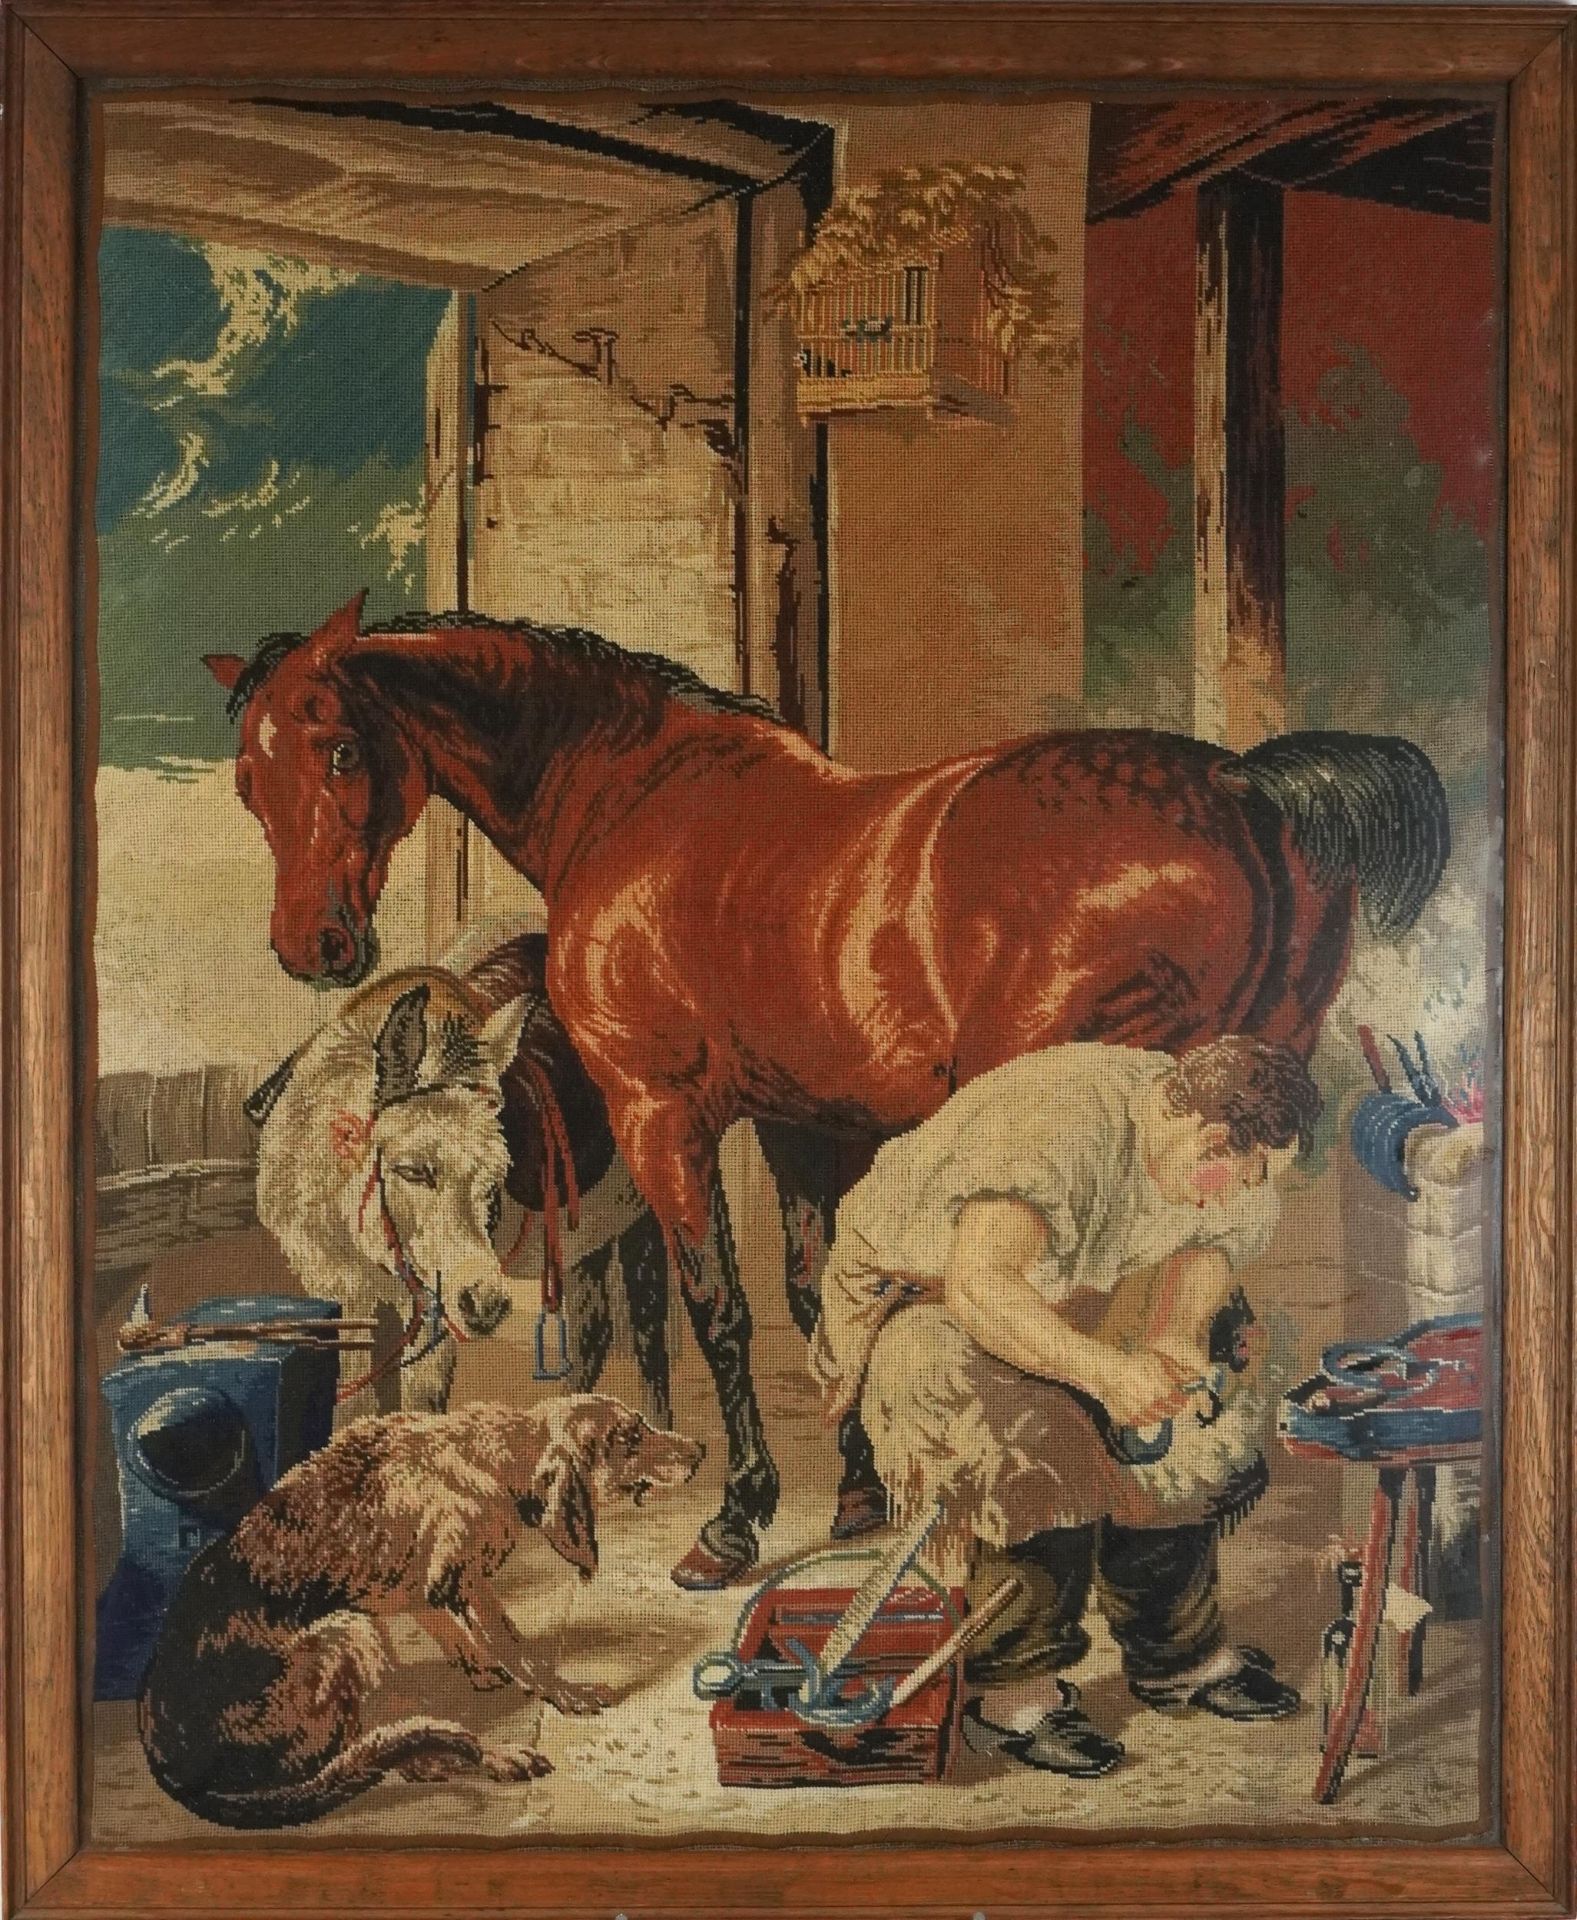 Farrier shoeing a horse with donkey and gundog, 19th century needlework tapestry, framed and glazed, - Image 2 of 3